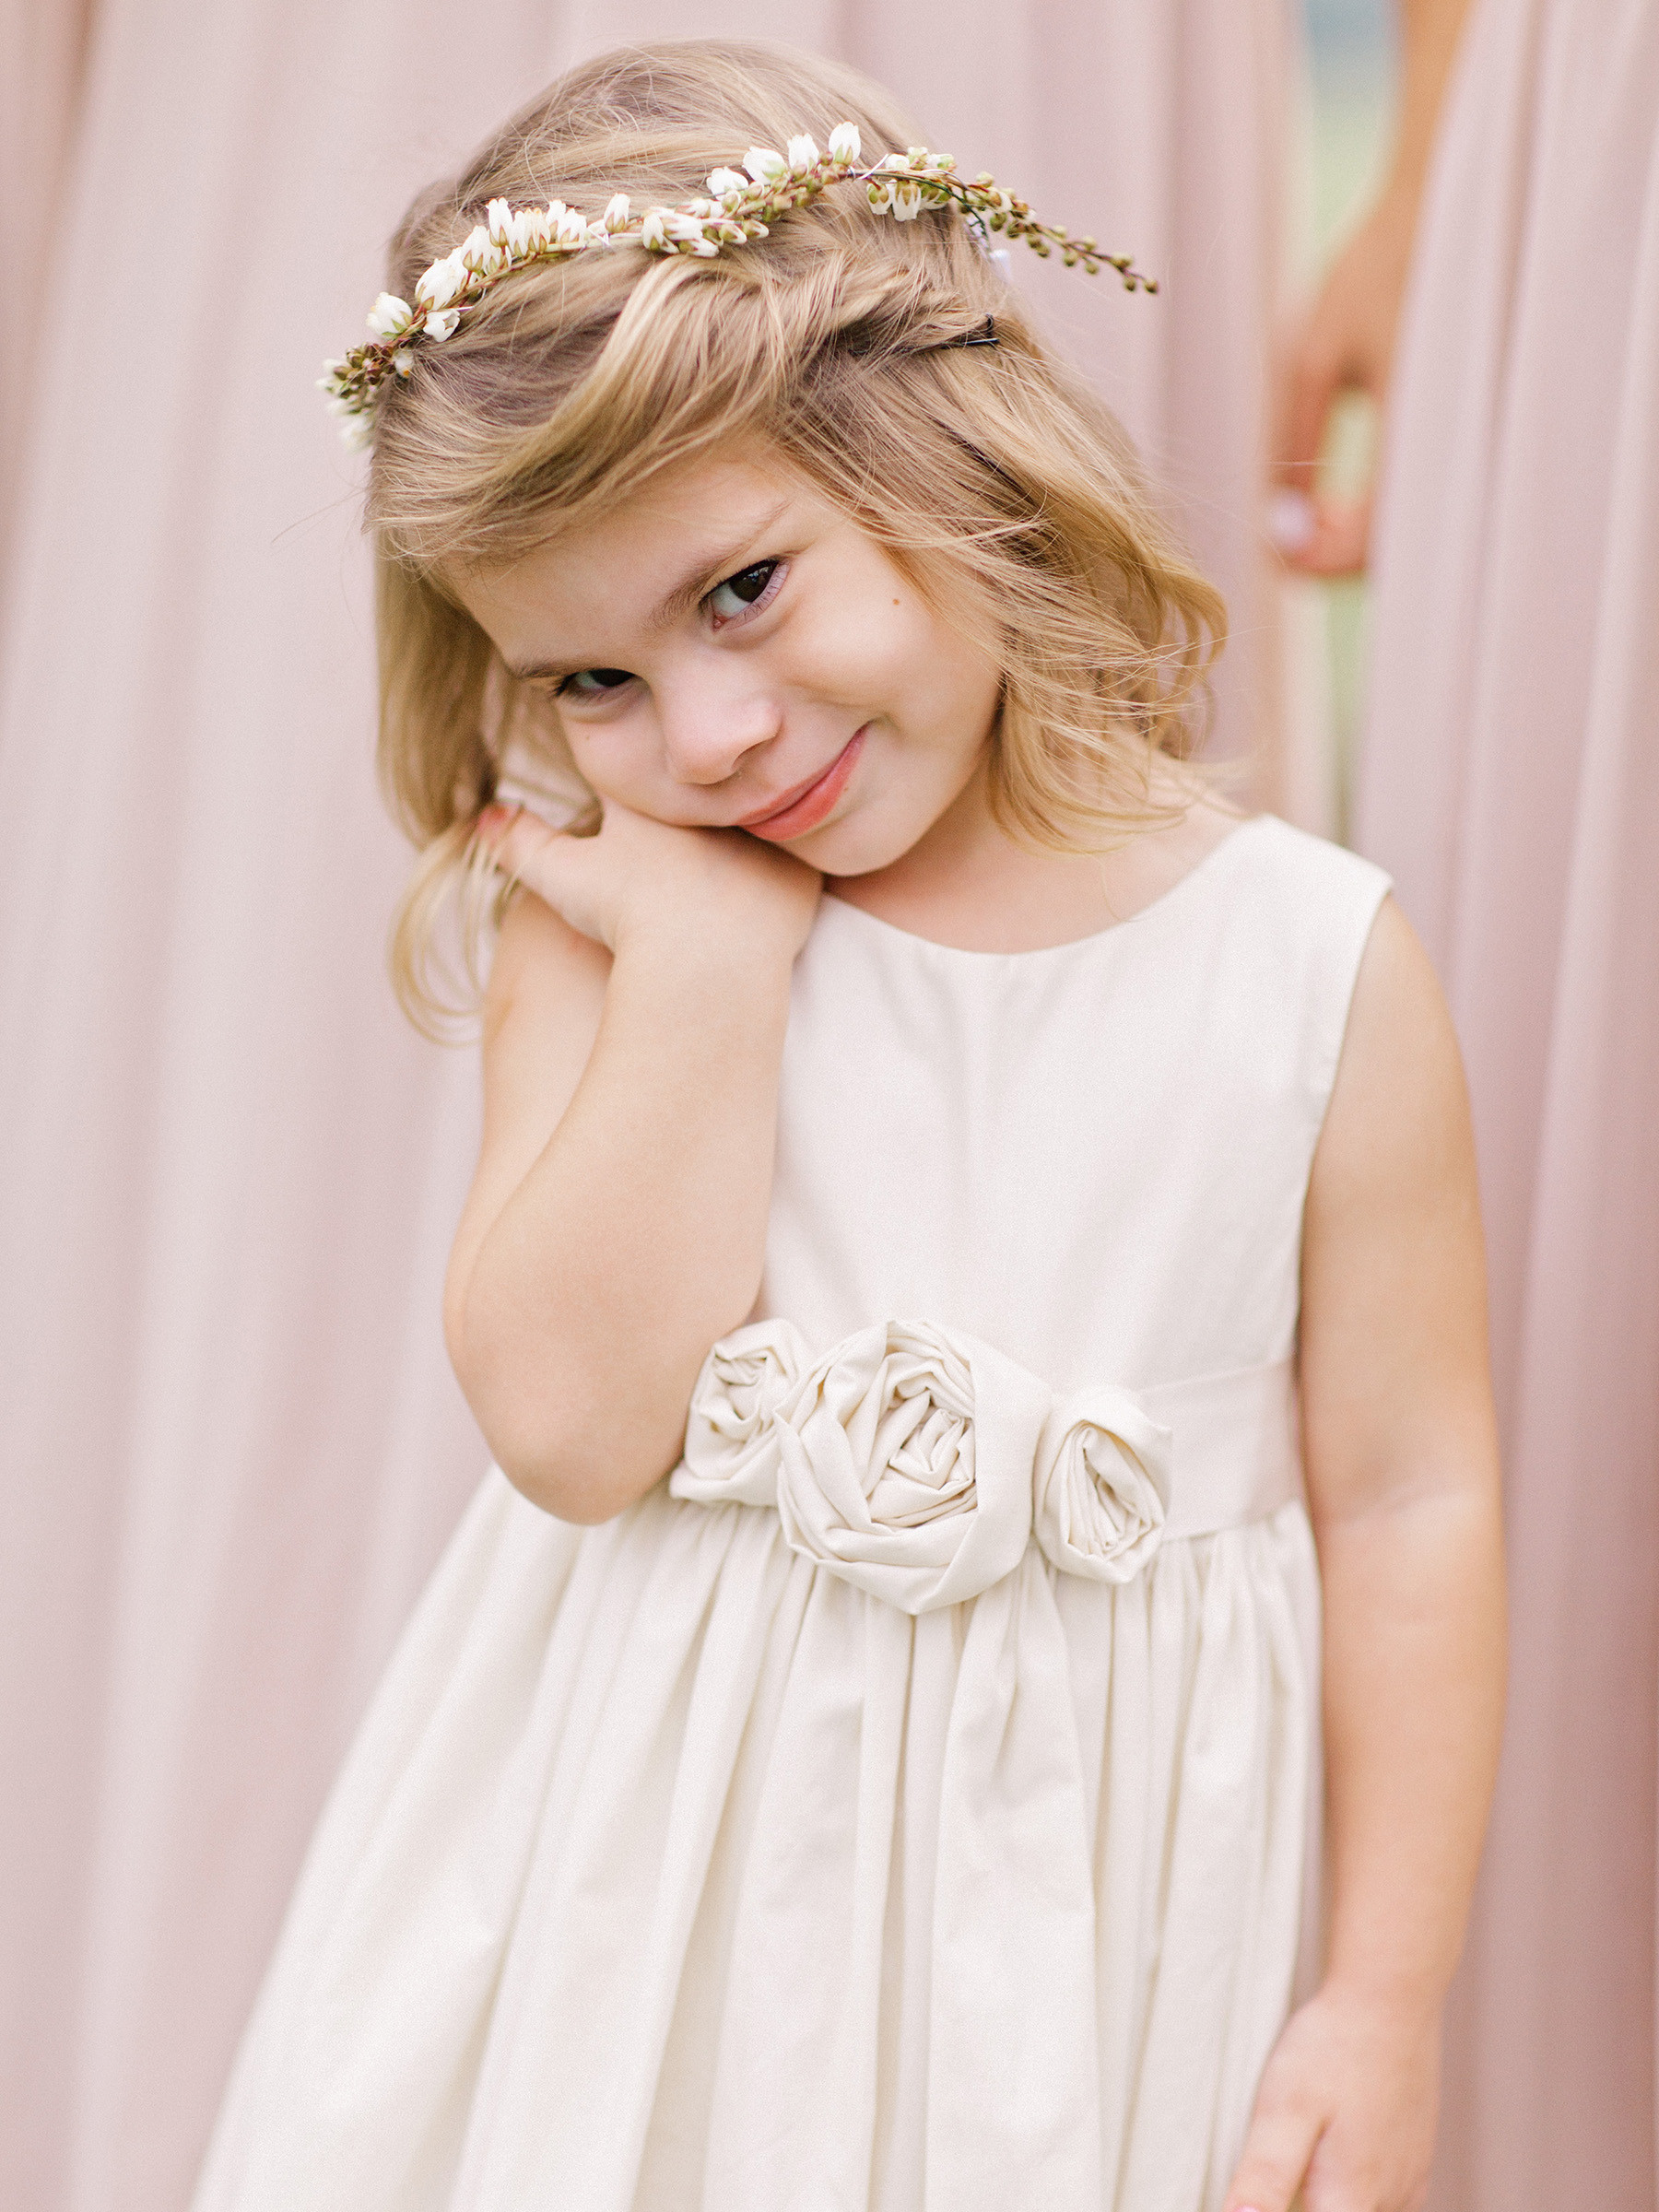 Wedding Flower Girl Hairstyles
 Adorable Hairstyle Ideas for Your Flower Girls